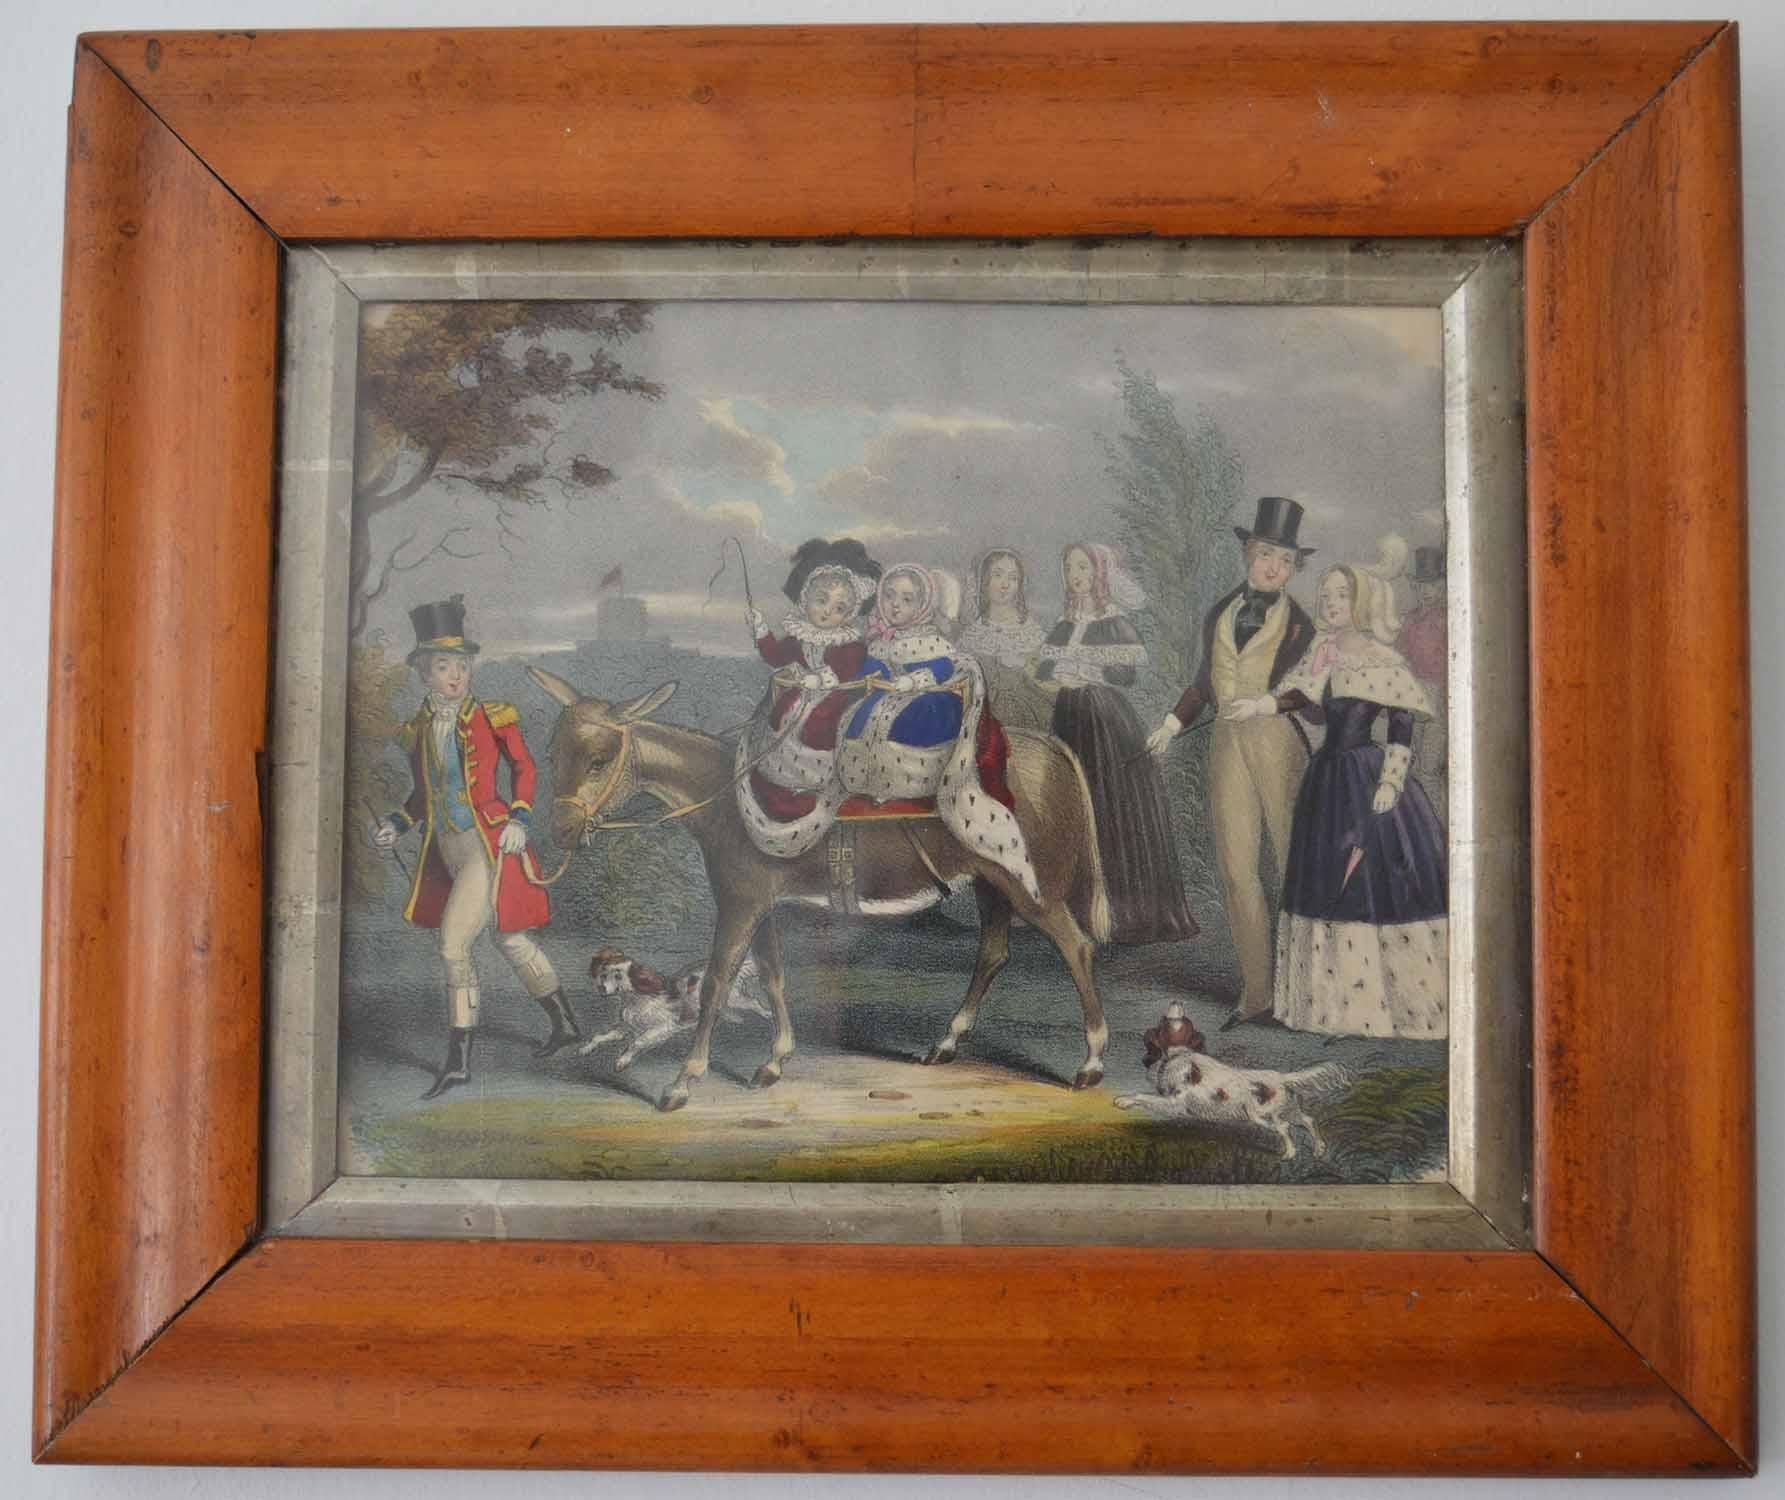 A super print of a royal party including Queen Victoria and Prince Albert.

Chromolithograph, published, circa 1850

Presented in an antique maple frame.

The measurement given below is the frame size.






 